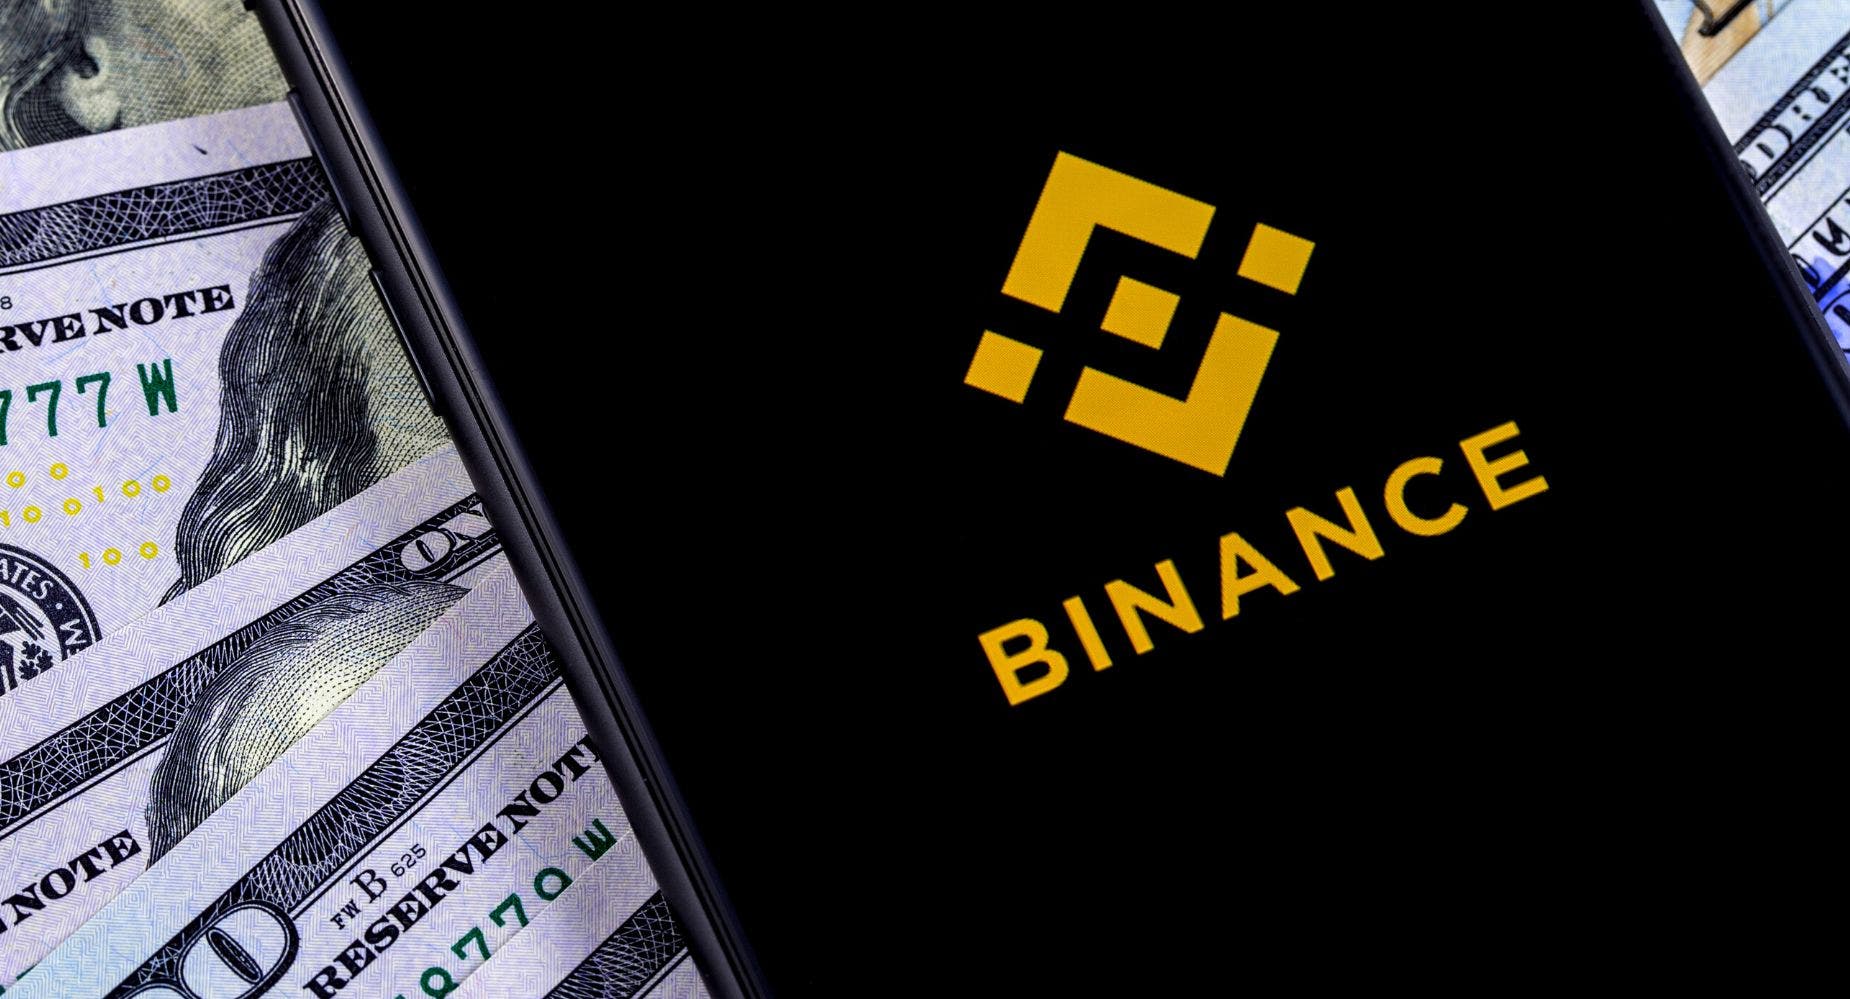 Binance Temporarily Stops USDC Withdrawals As Investor Concerns Over Reserves Mount